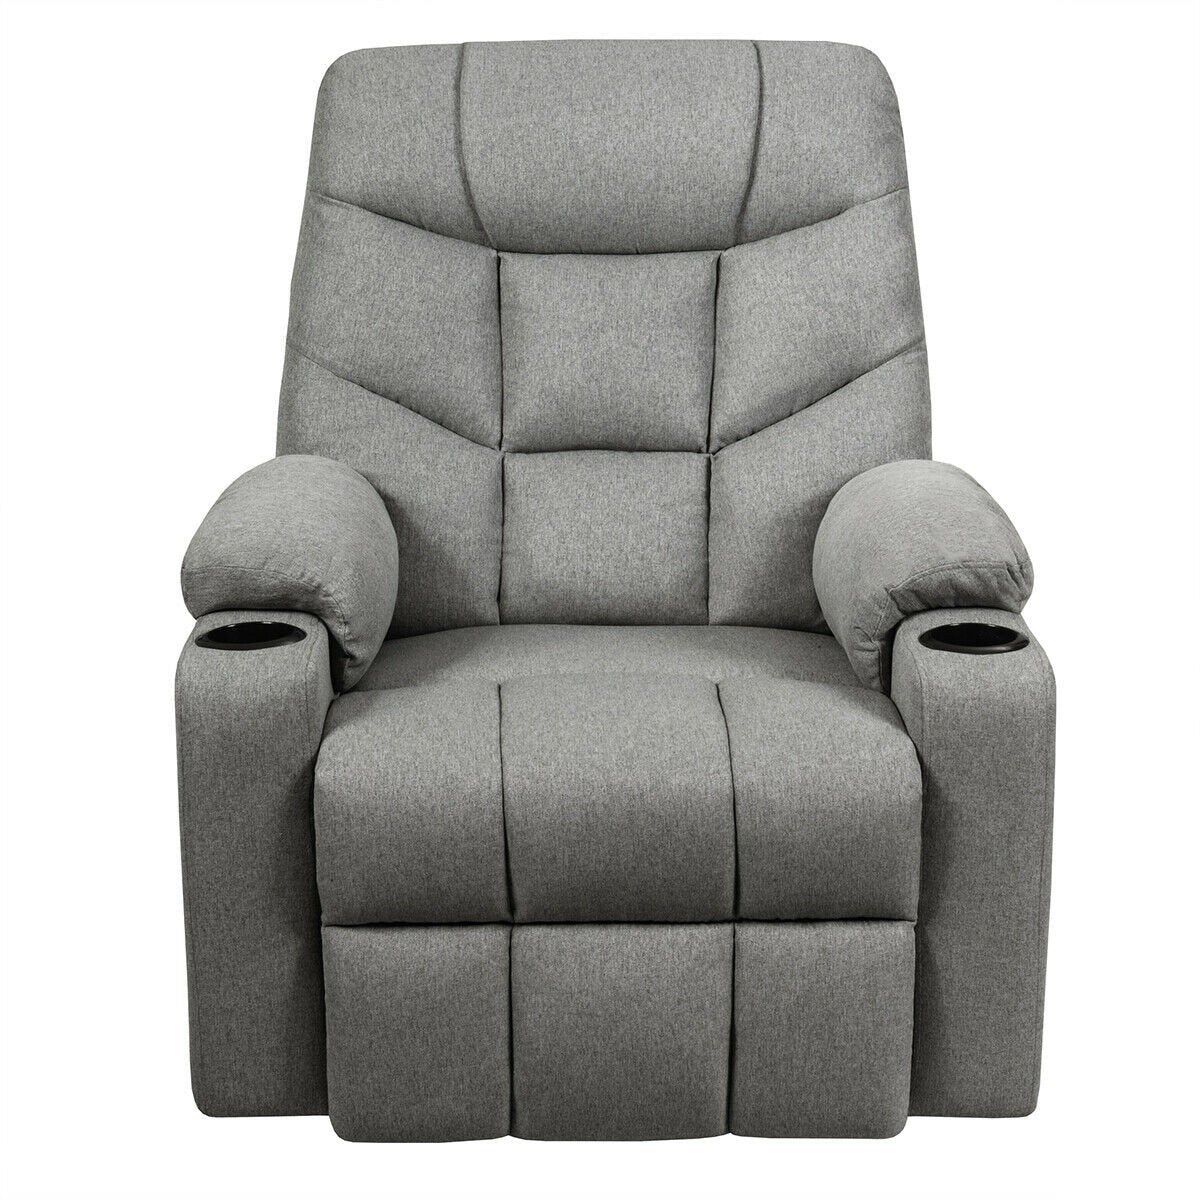 Power Lift Chair w/ 8 Point Massage & Lumbar Heat & 2 Side Pockets Cup Holders USB Charge Port